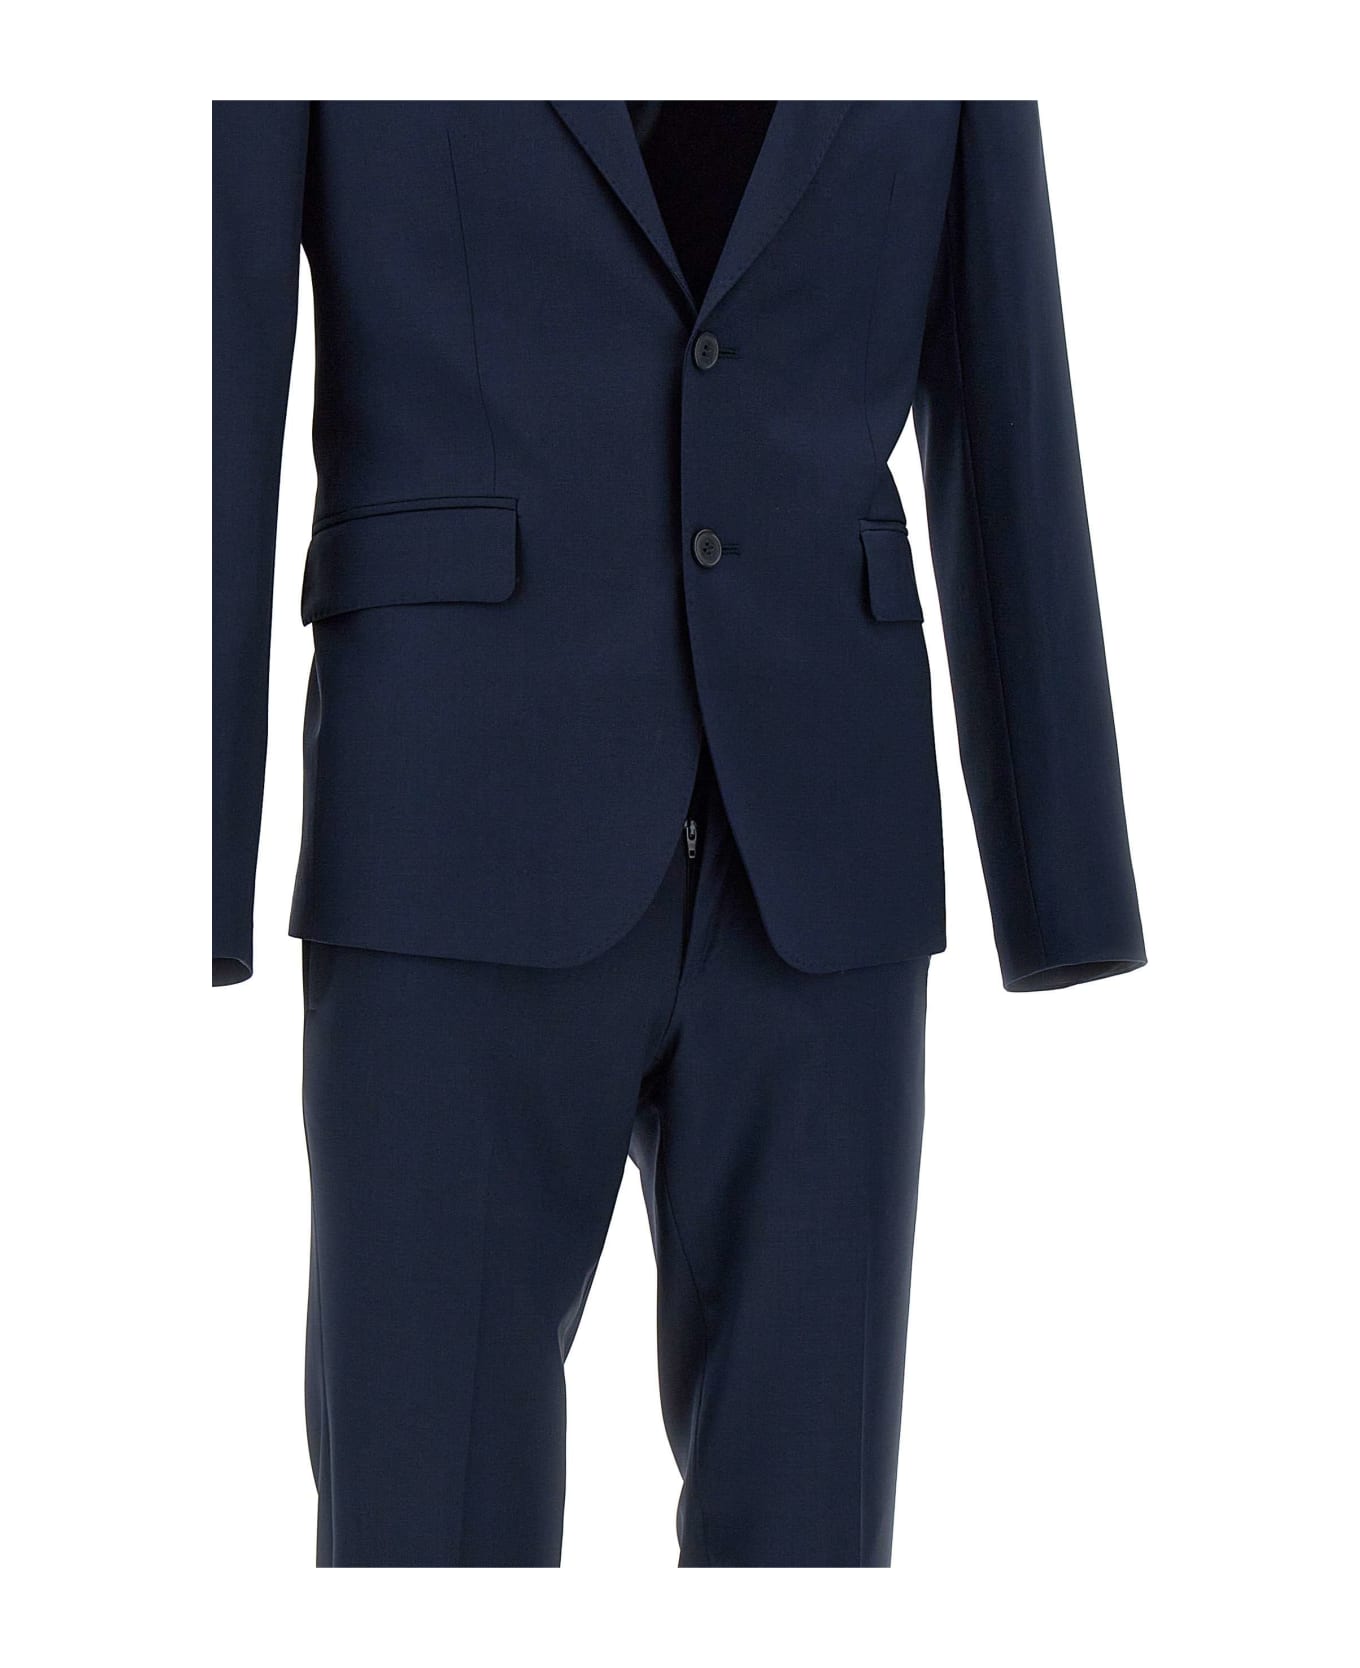 Brian Dales Two-piece Suit - BLUE スーツ